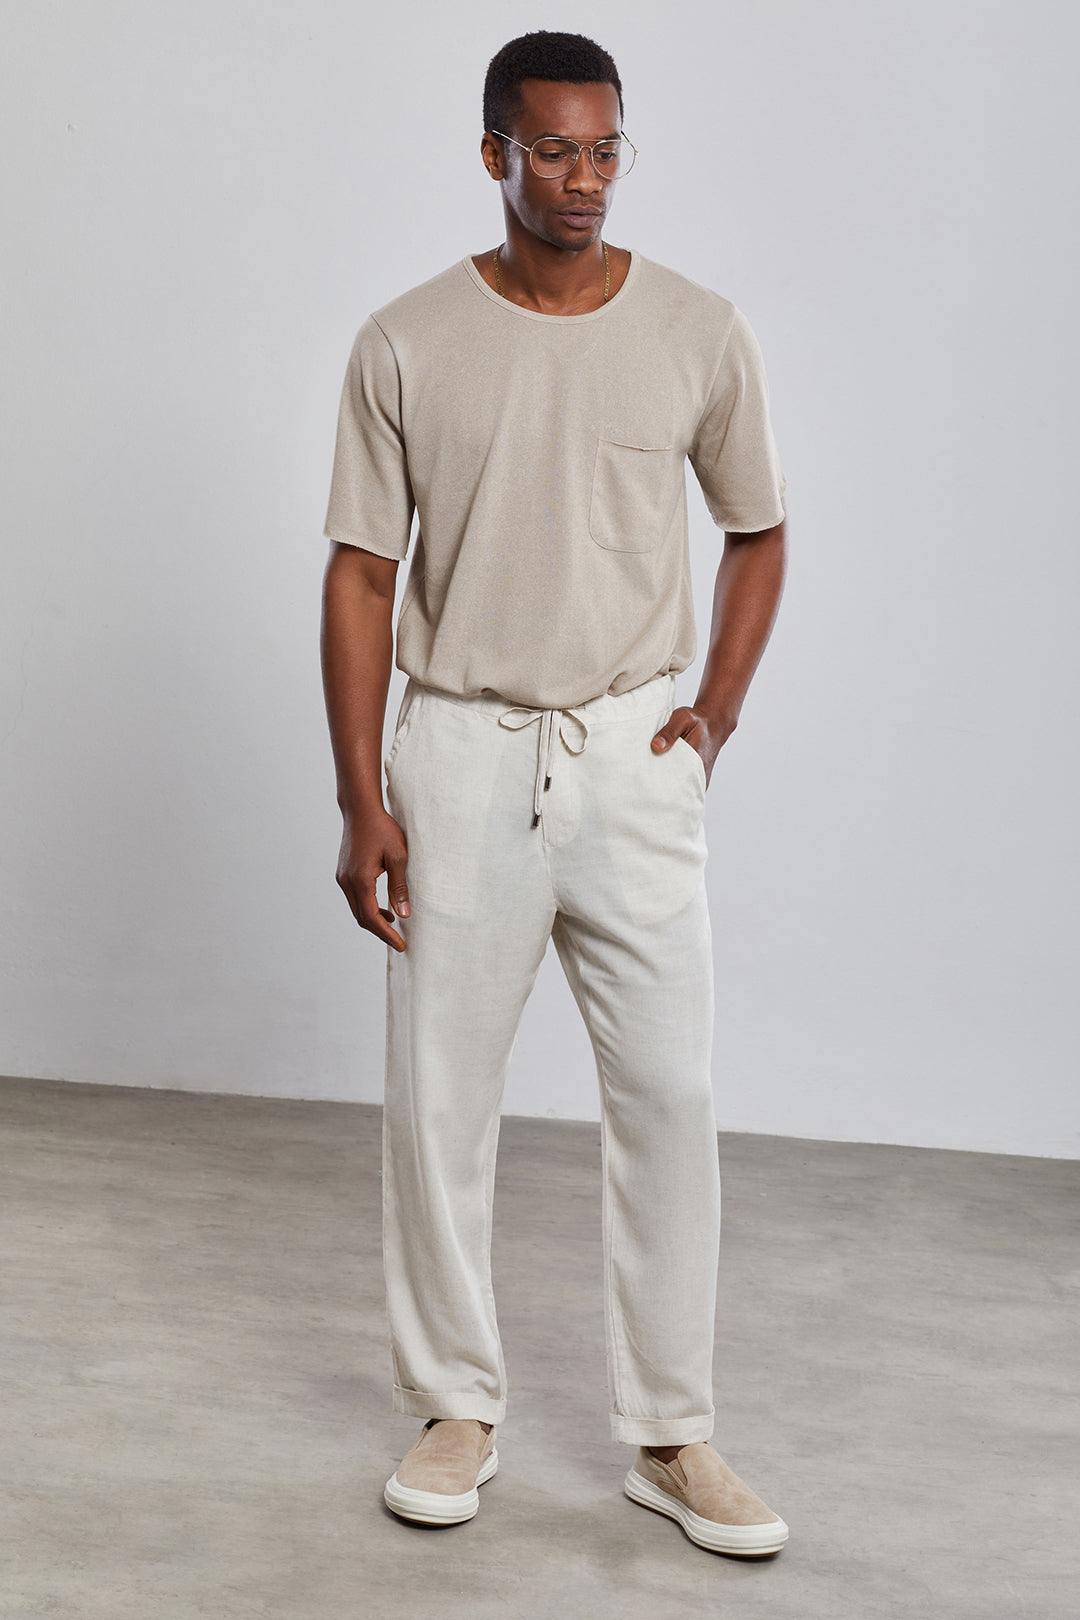 White Mens 100 Linen Beach Tapered Pants Trousers Relaxed Fit | Linen beach  pants, Linen trousers men, Linen trousers